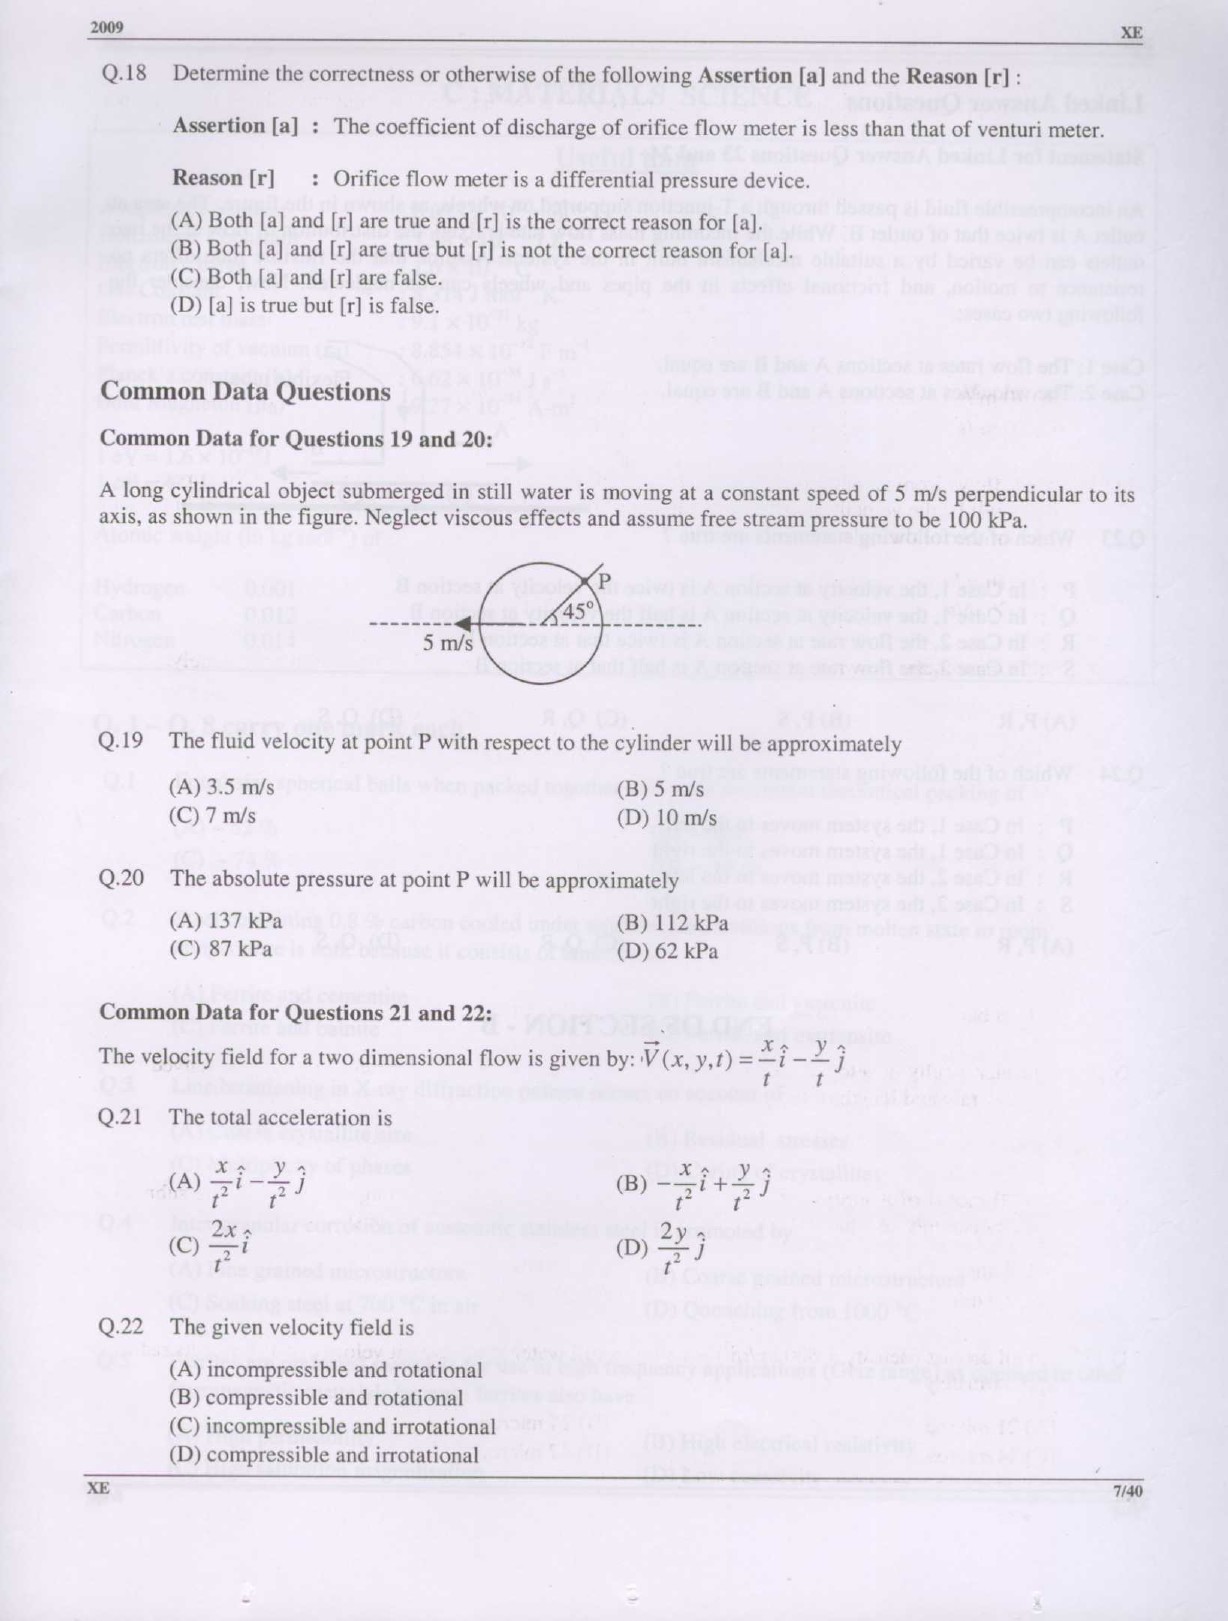 GATE Exam Question Paper 2009 Engineering Sciences 7